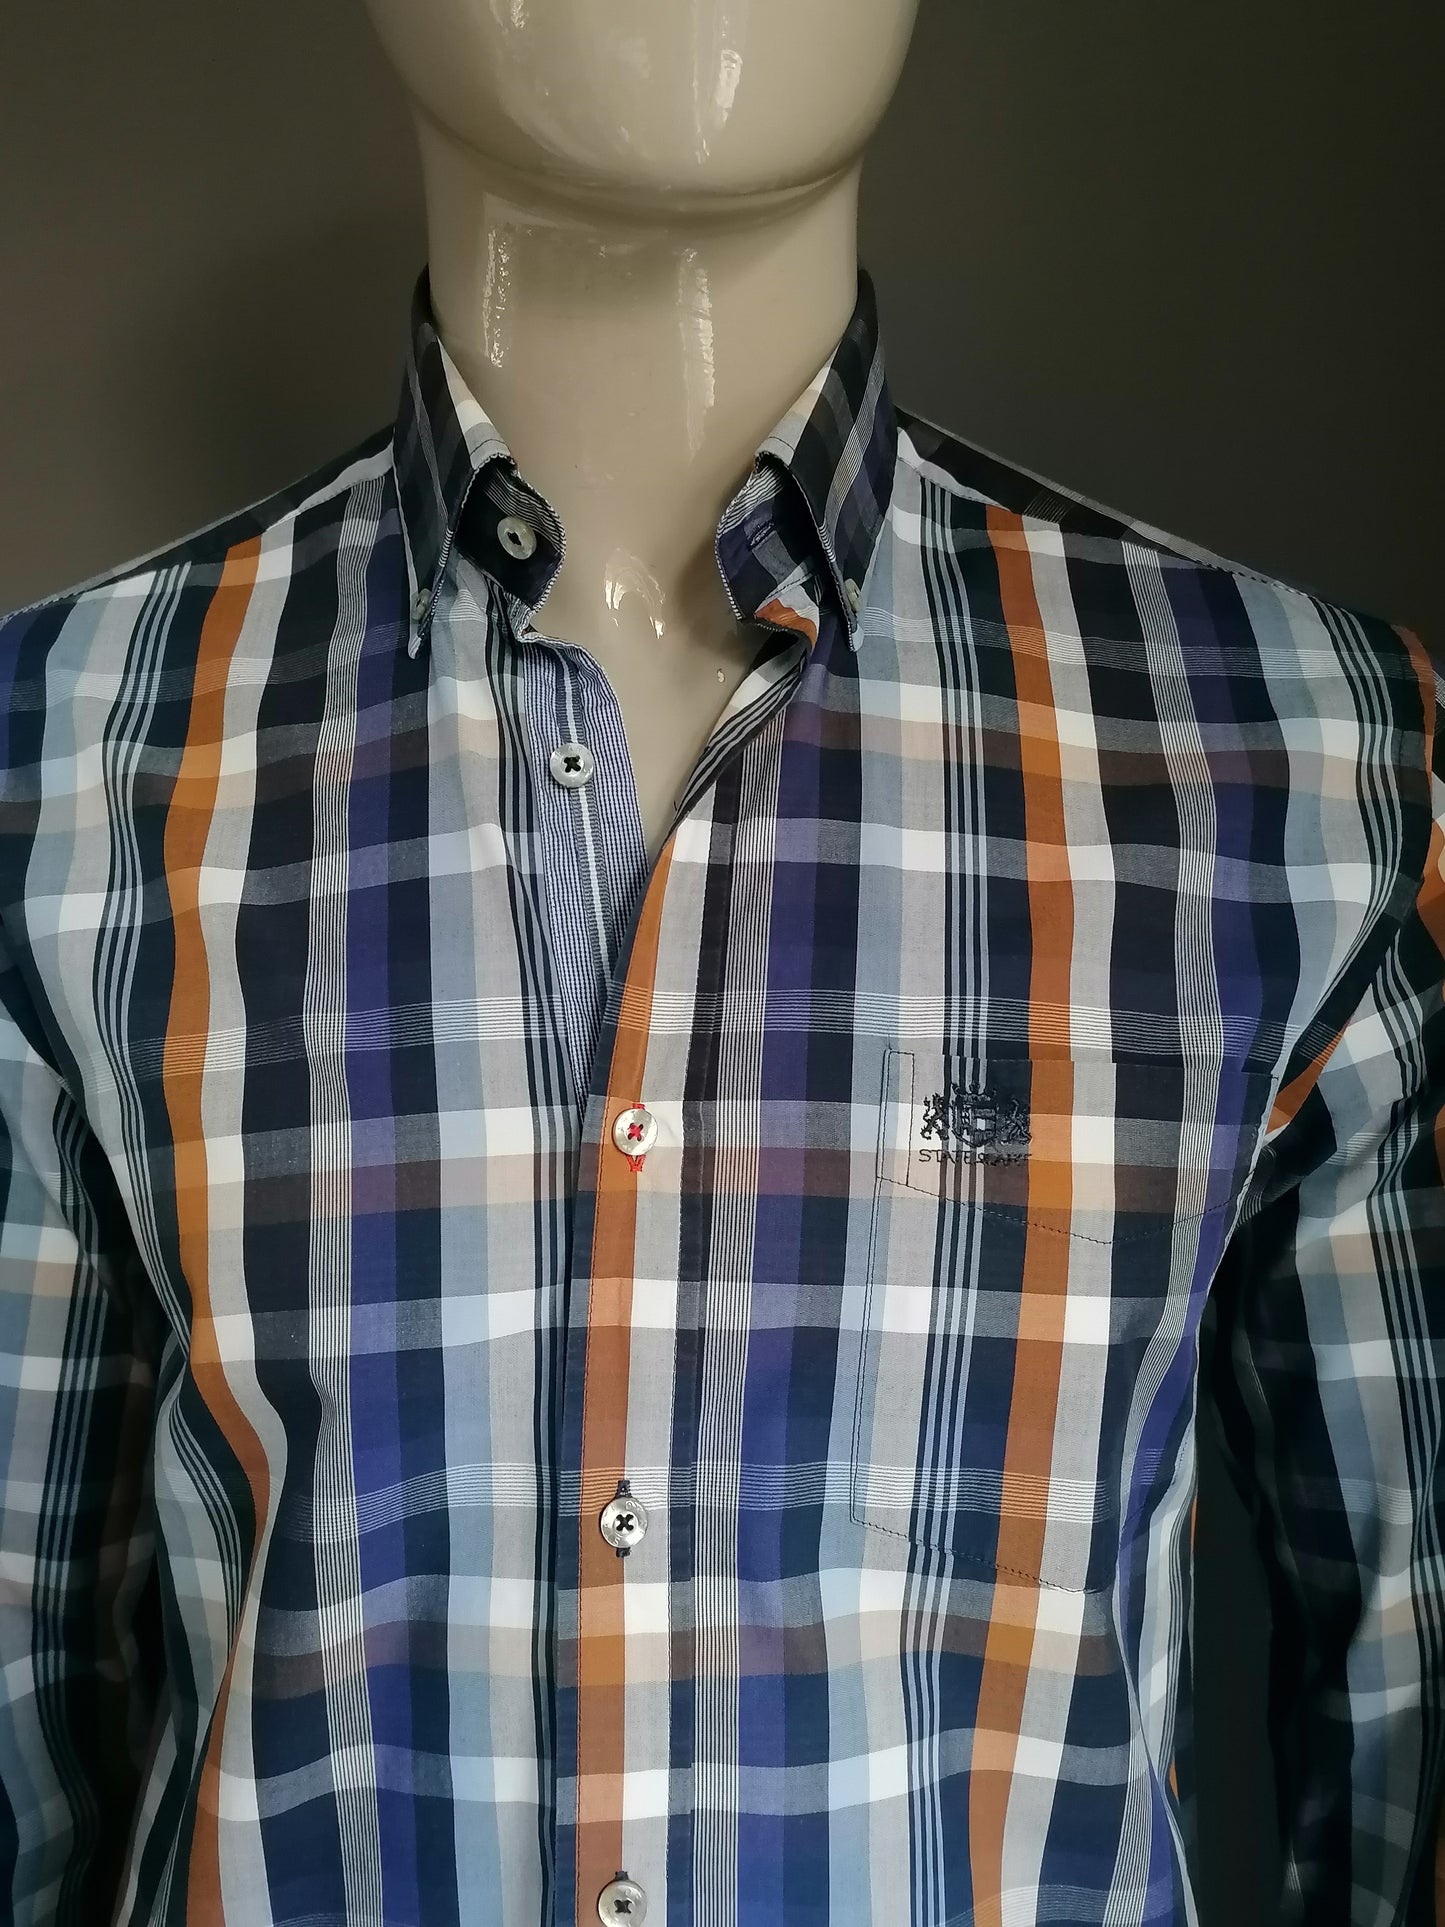 State of art shirt. Blue brown checked. Size M. Regular Fit.